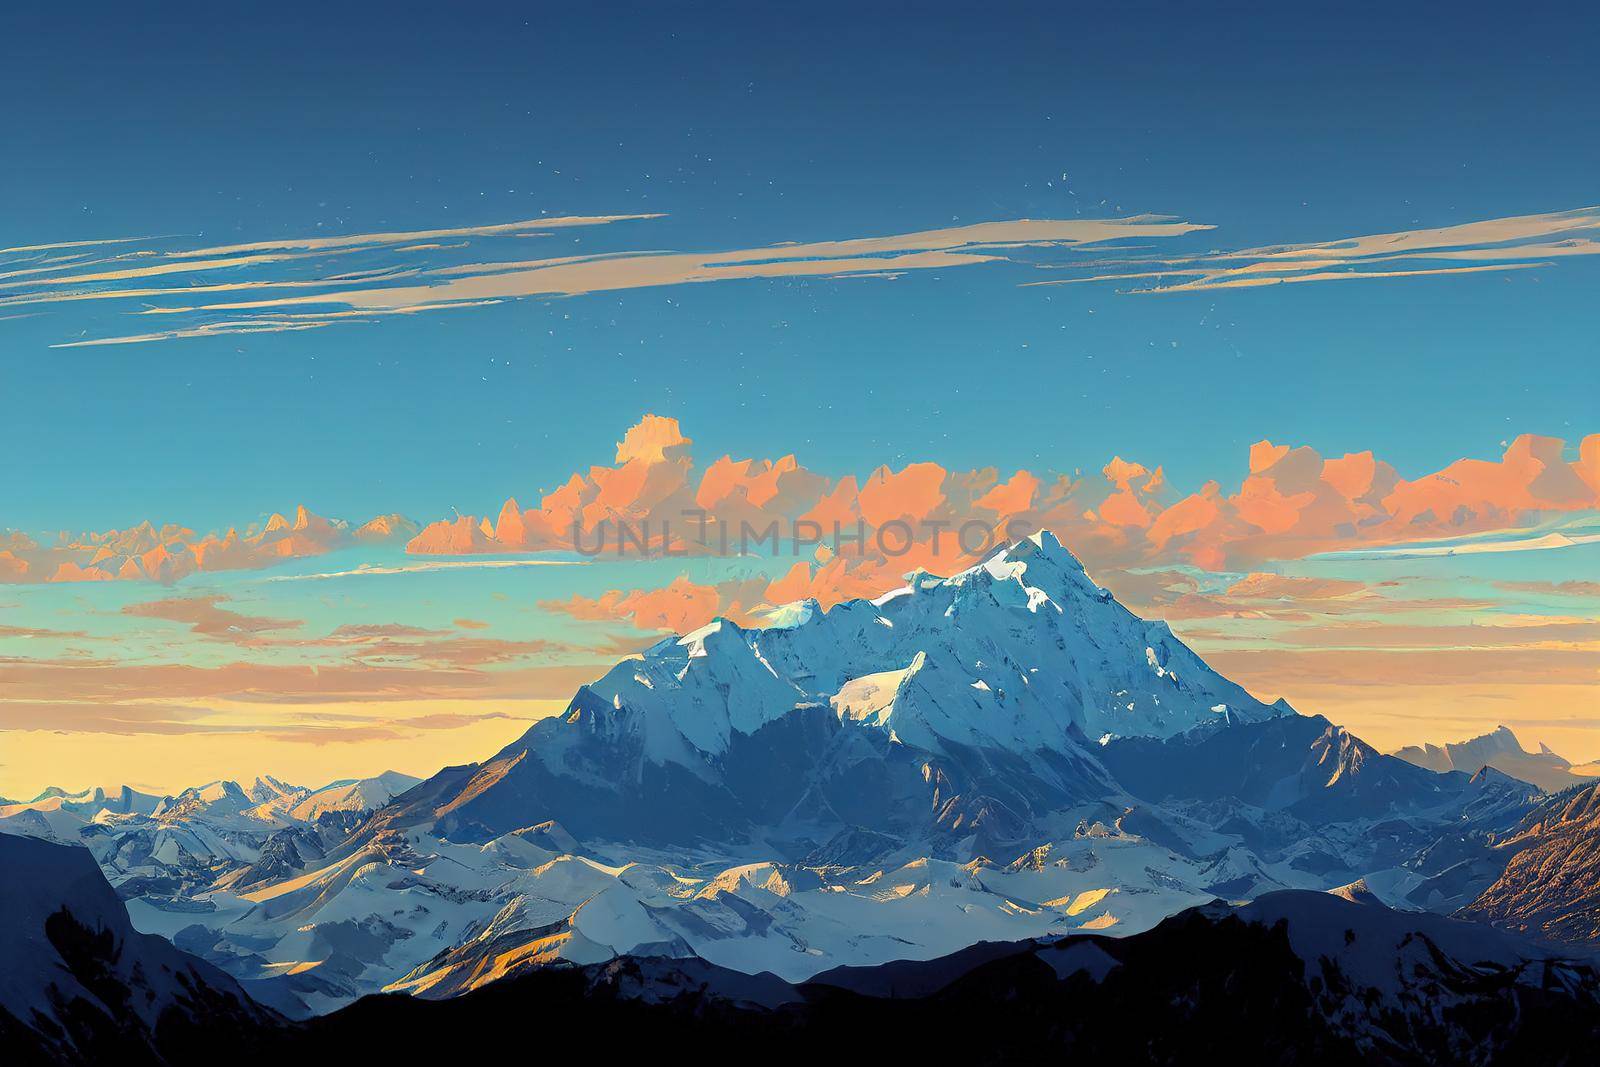 Mt, Elbrus glacier against Caucasus mountains in the evening before sunset, Panoramic view from Bochki refuge, Prielbrusie national park, Kabardino-Balkaria, Russia anime style v2